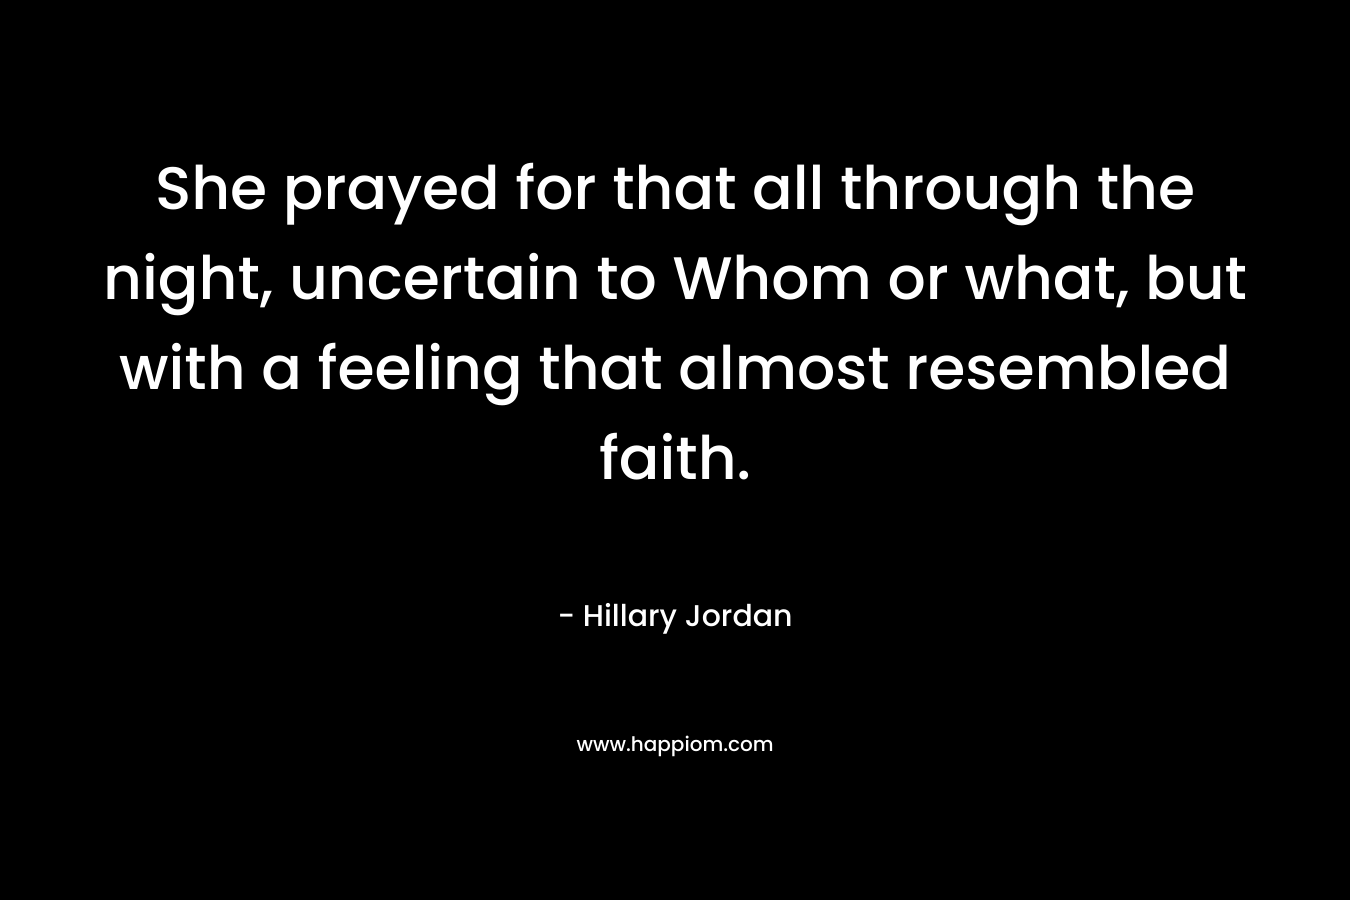 She prayed for that all through the night, uncertain to Whom or what, but with a feeling that almost resembled faith. – Hillary Jordan